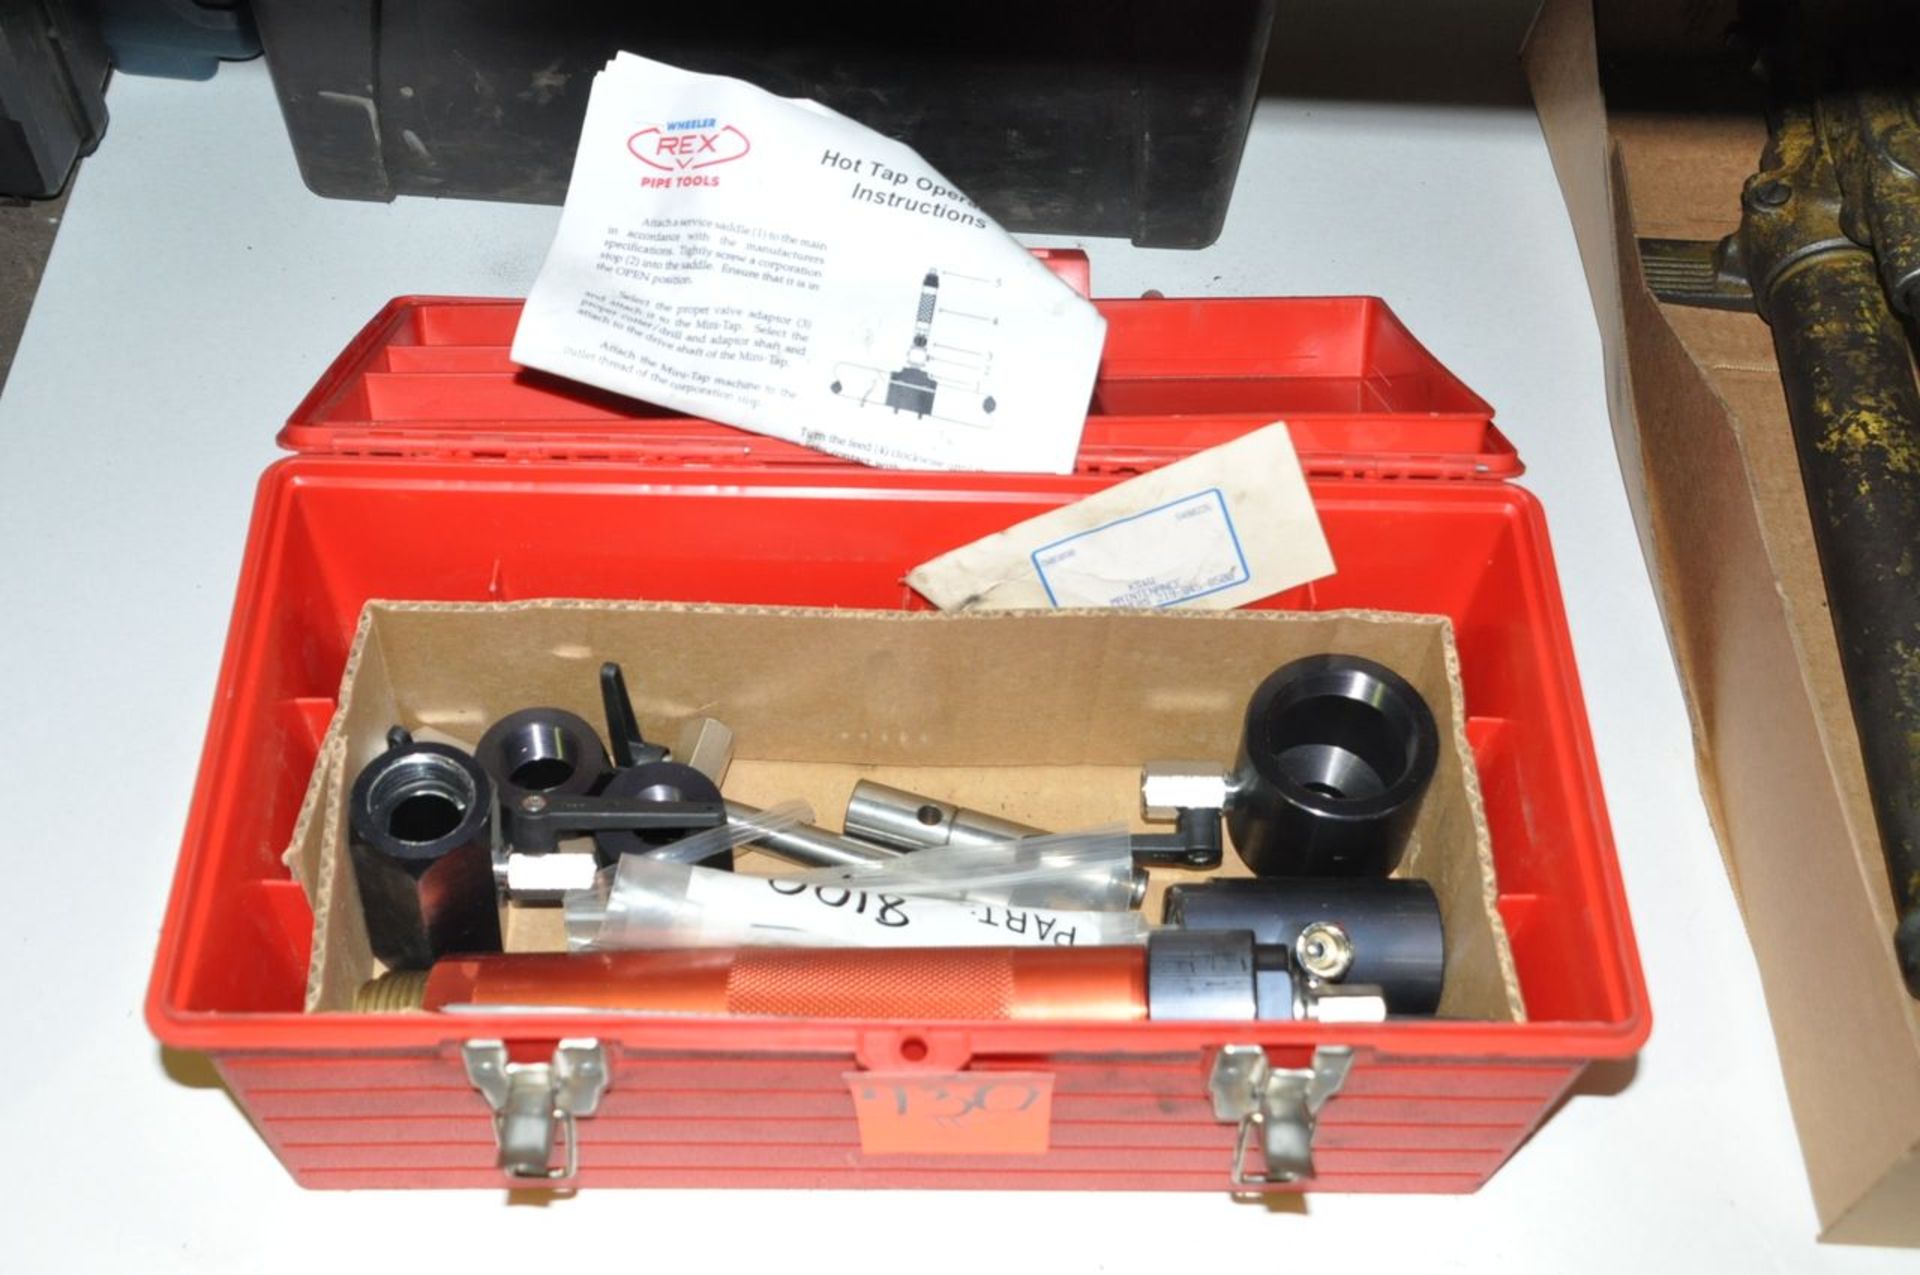 Rex Hot Tap Pipe Tool with Case Under (1) Table, (Machine Shop)